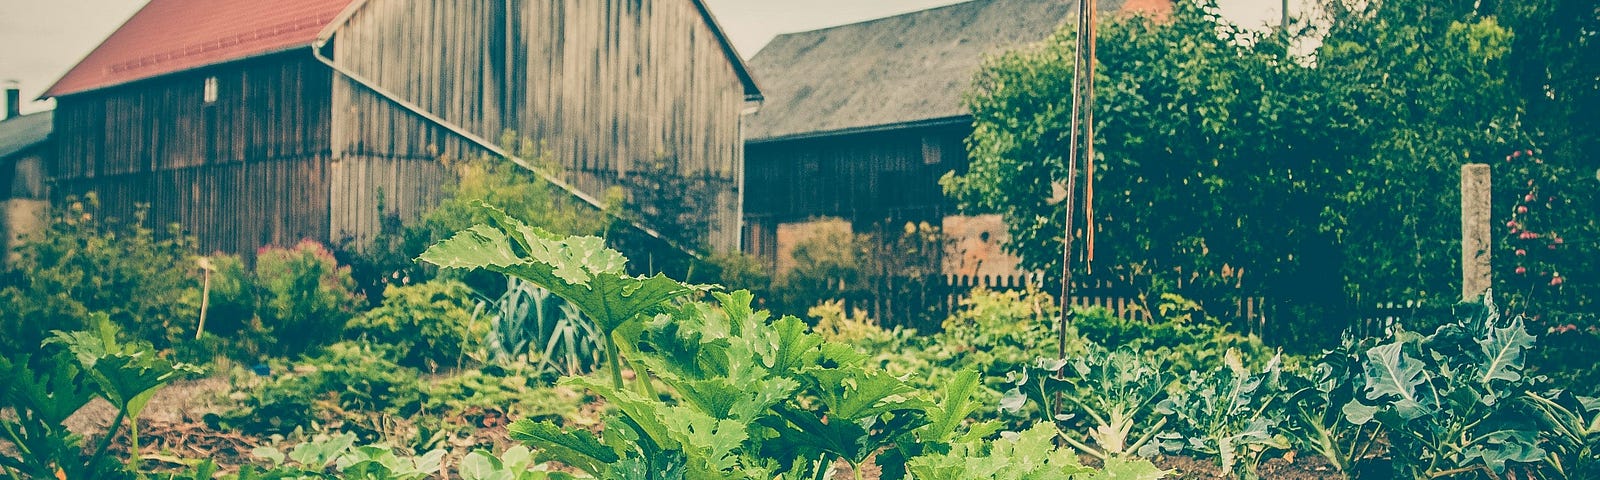 A vegetable garden outside a rundown home in the countryside